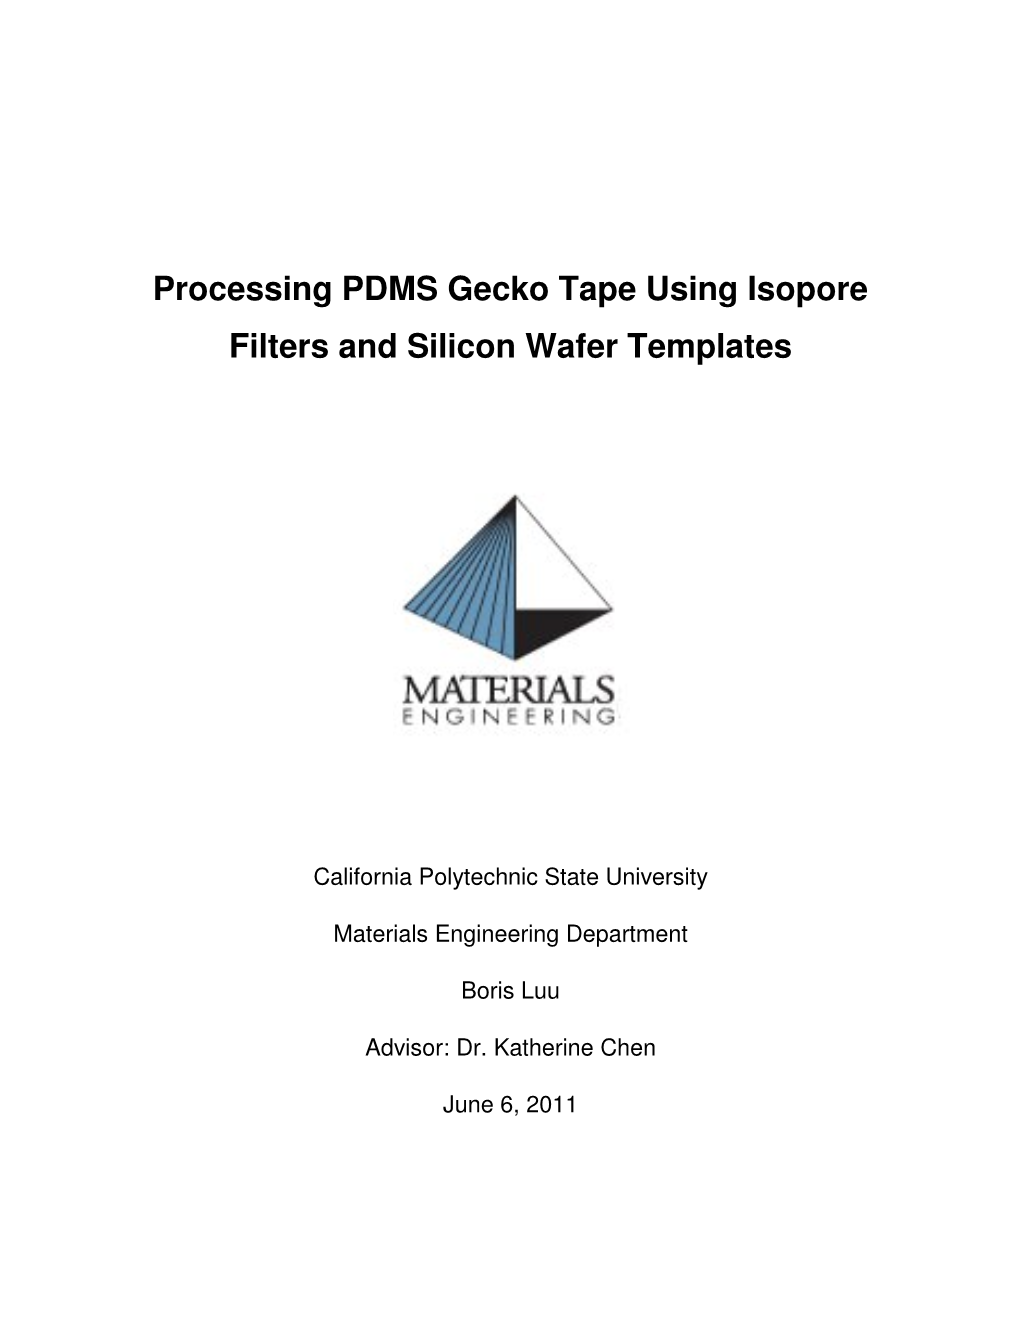 Processing PDMS Gecko Tape Using Isopore Filters and Silicon Wafer Templates